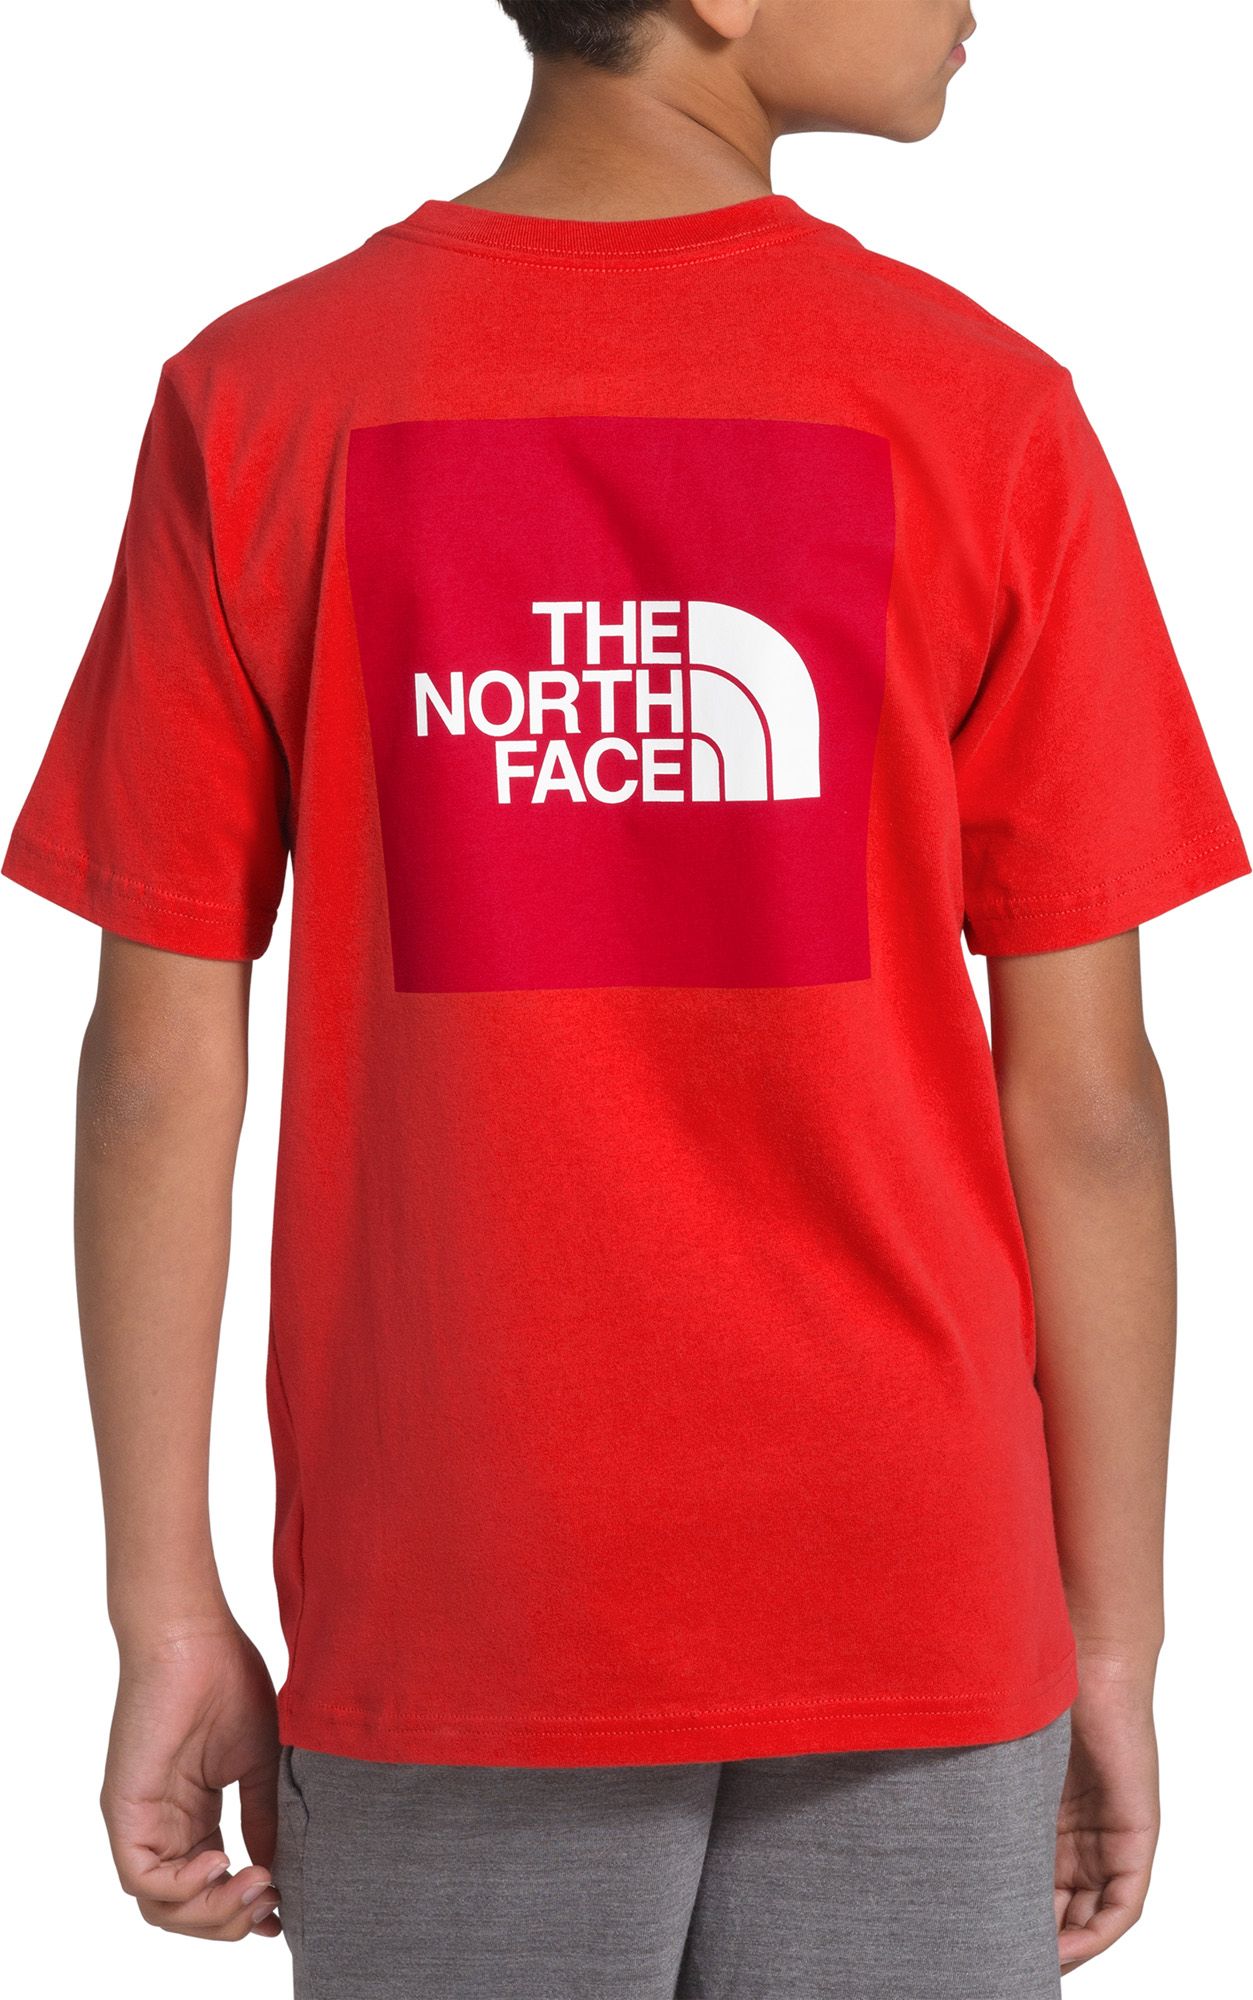 the north face t shirt price